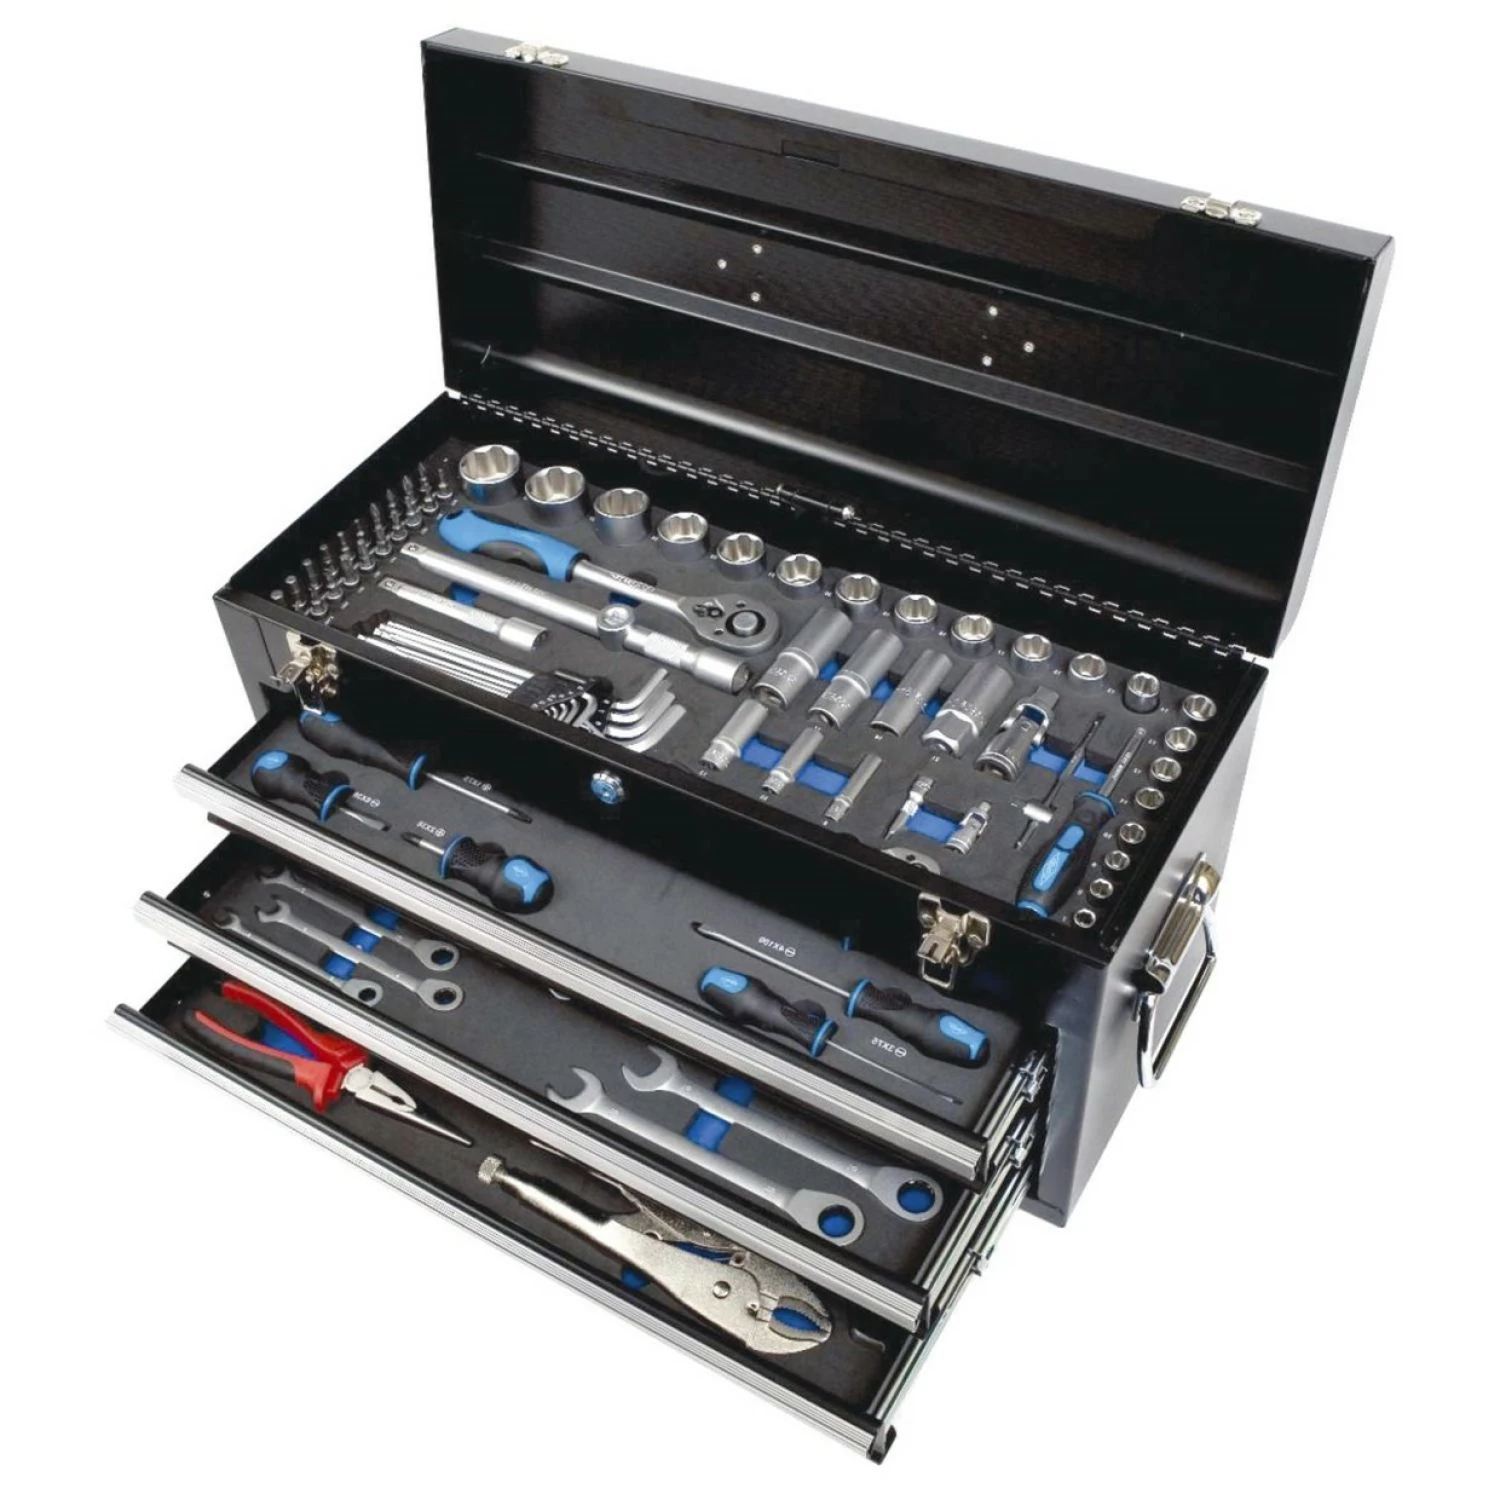 Airpress 75251 - Coffret d'outillage 97 Raccords